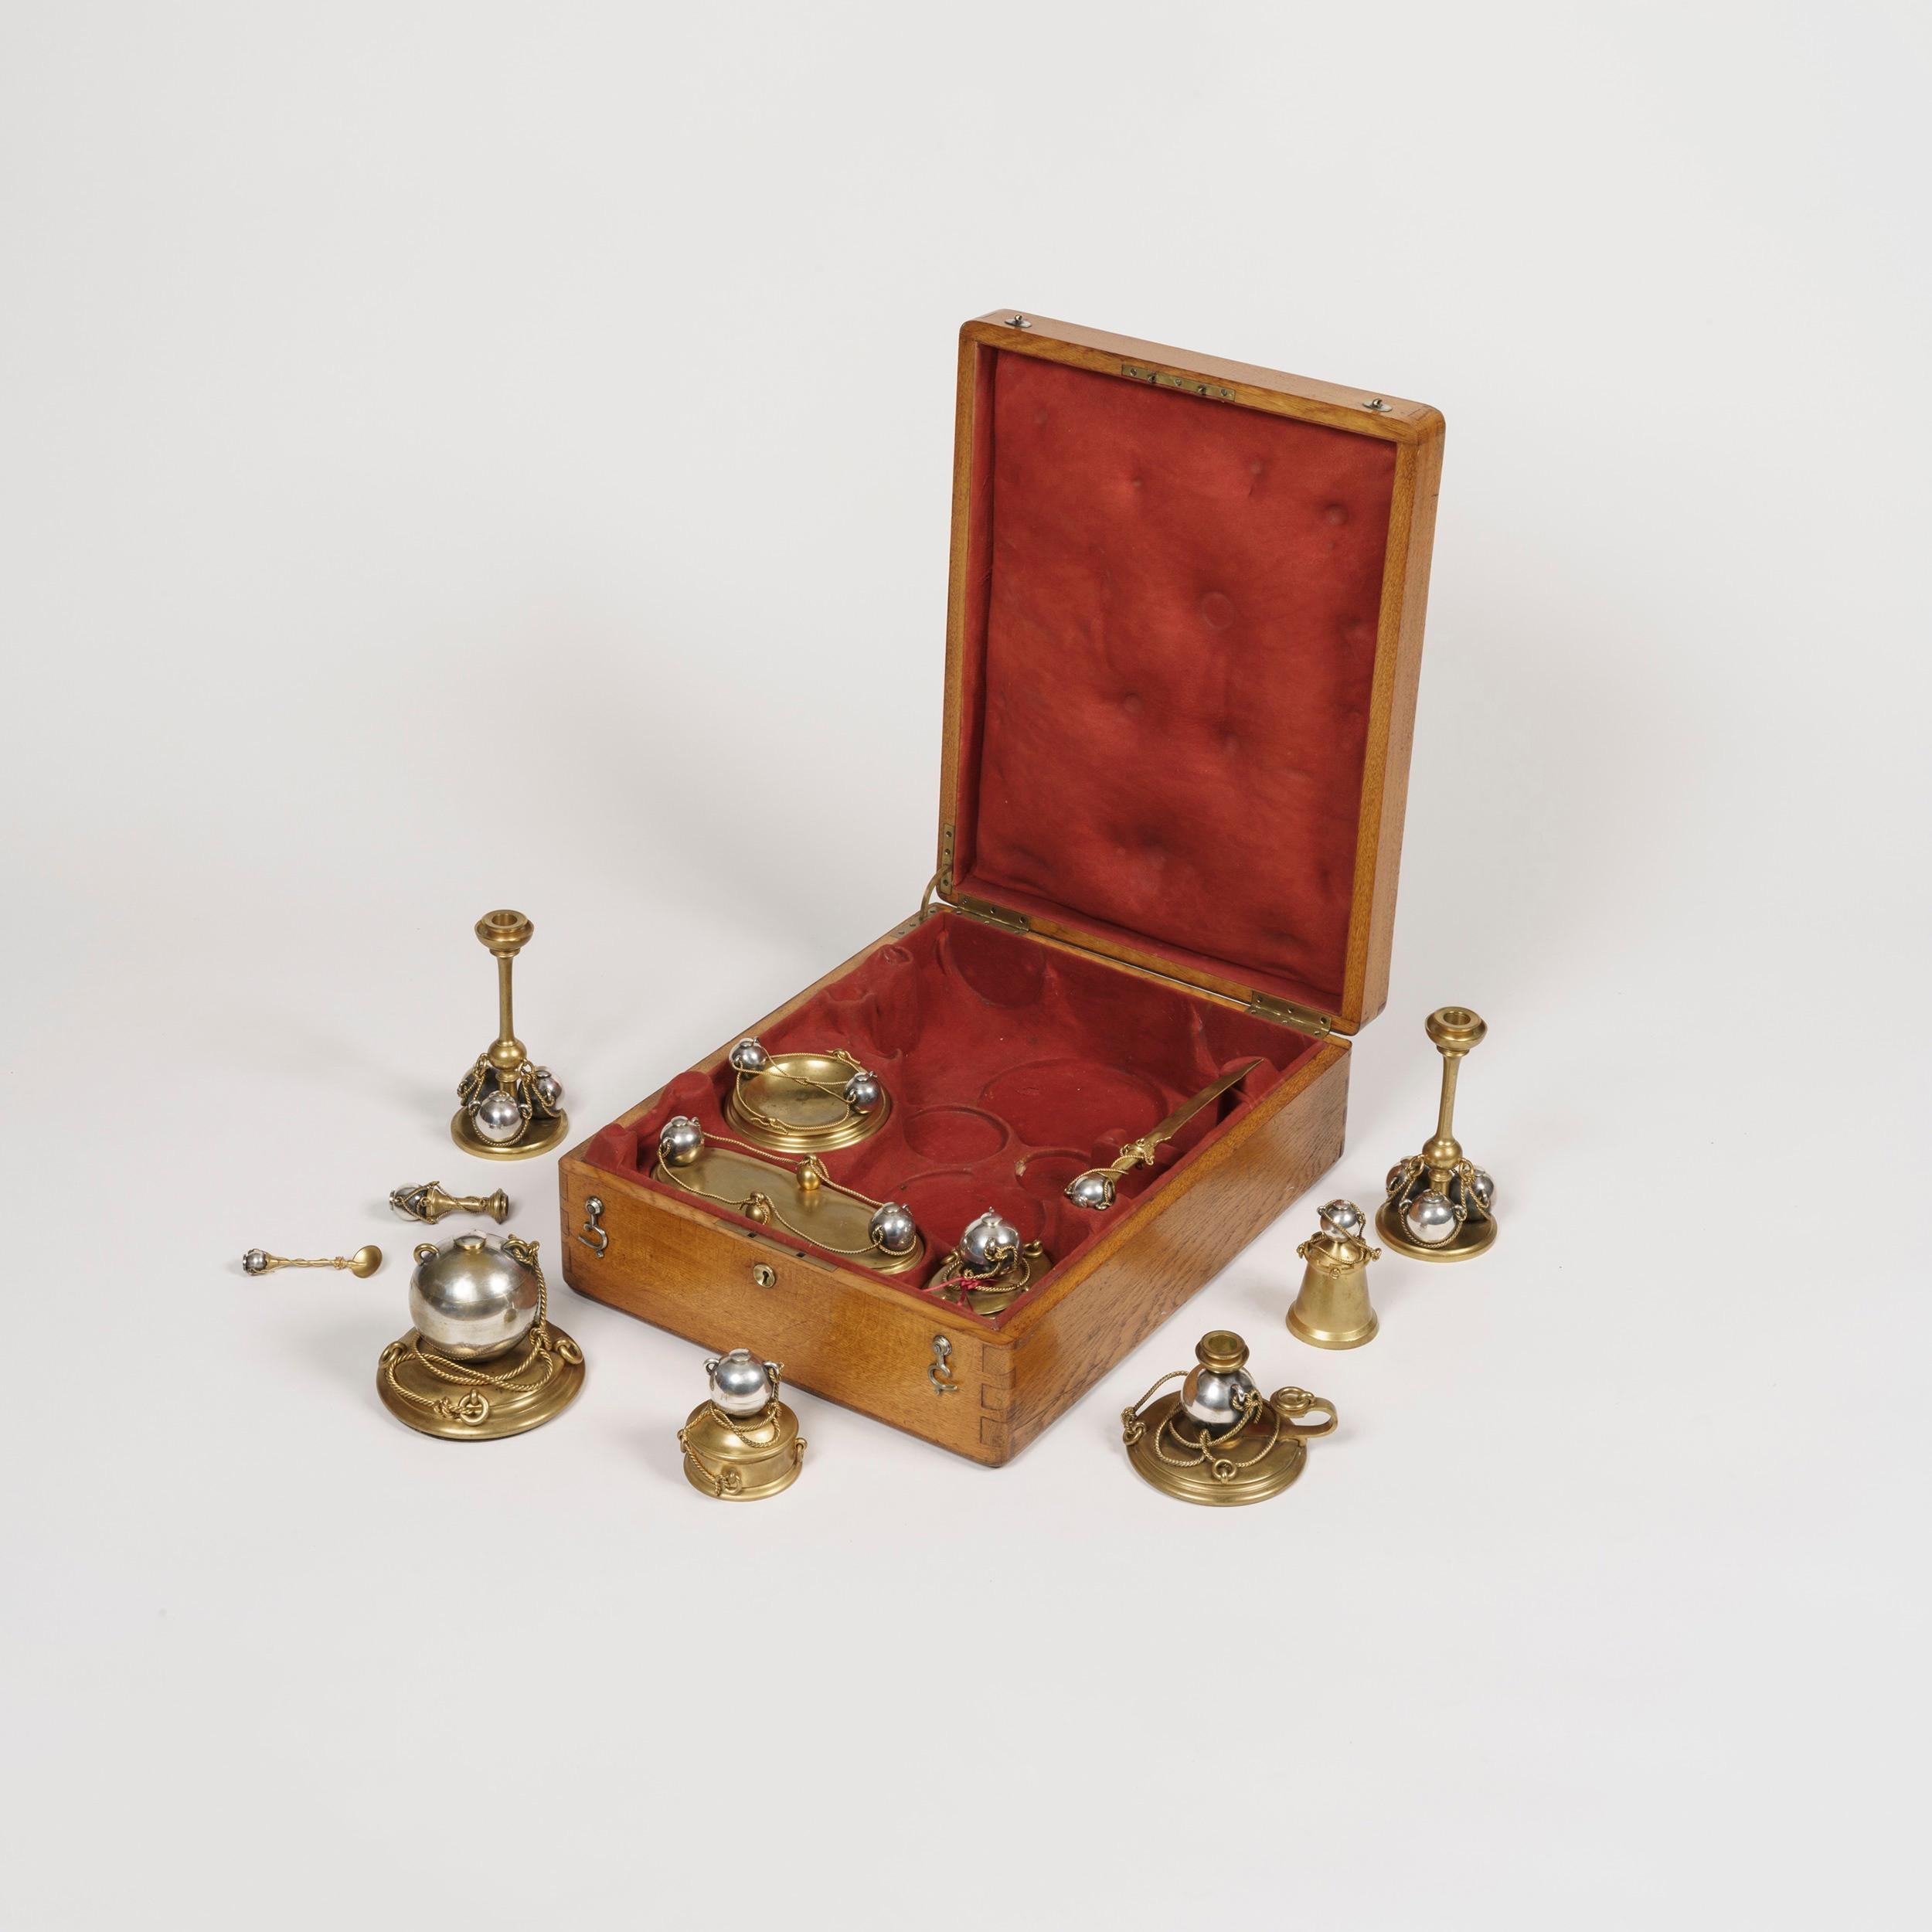 A rare nautical desk set

The lockable oak felt-lined case, embossed with the initials 'AL' of the original owner, houses twelve writing implements and accessories, constructed in silver plate and gilt metal, using spheres and chain work